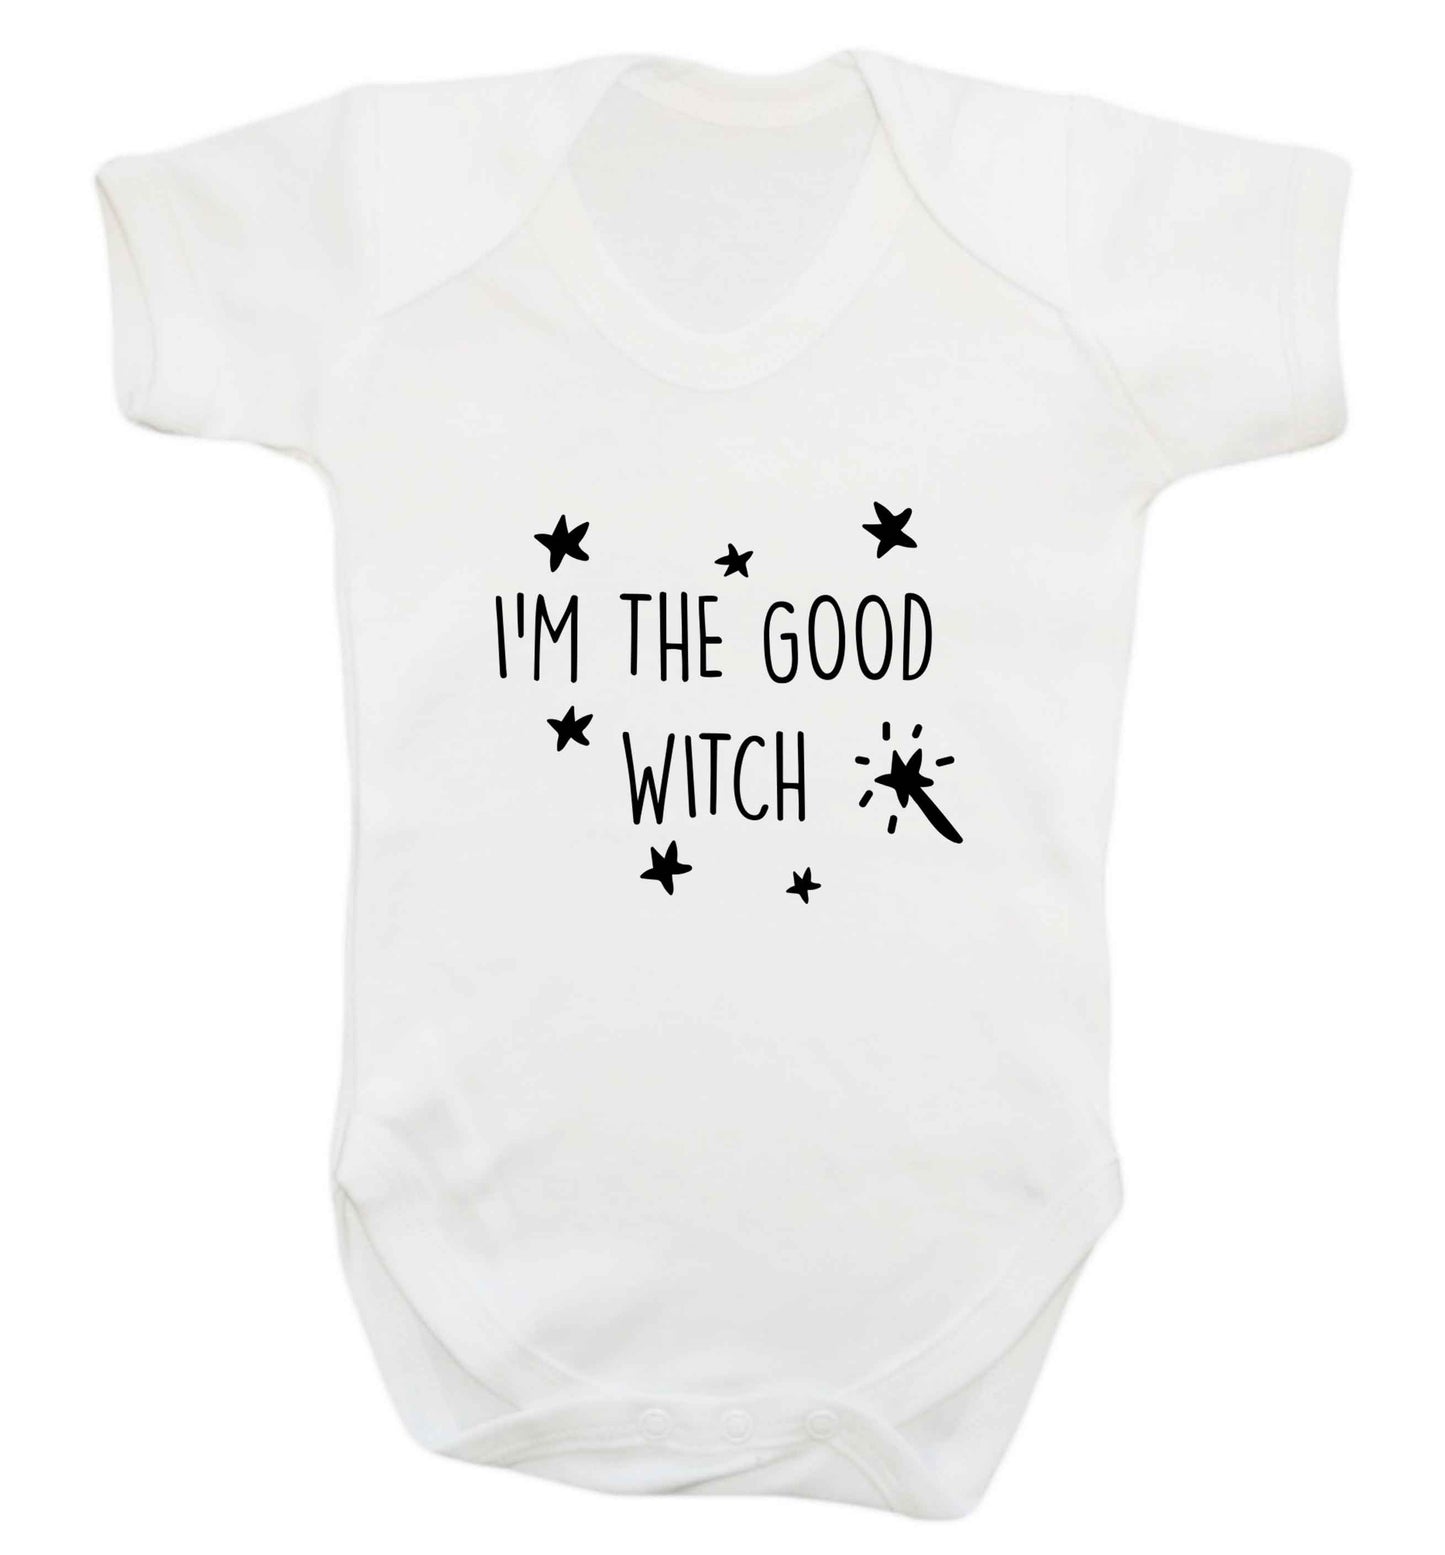 Good witch baby vest white 18-24 months